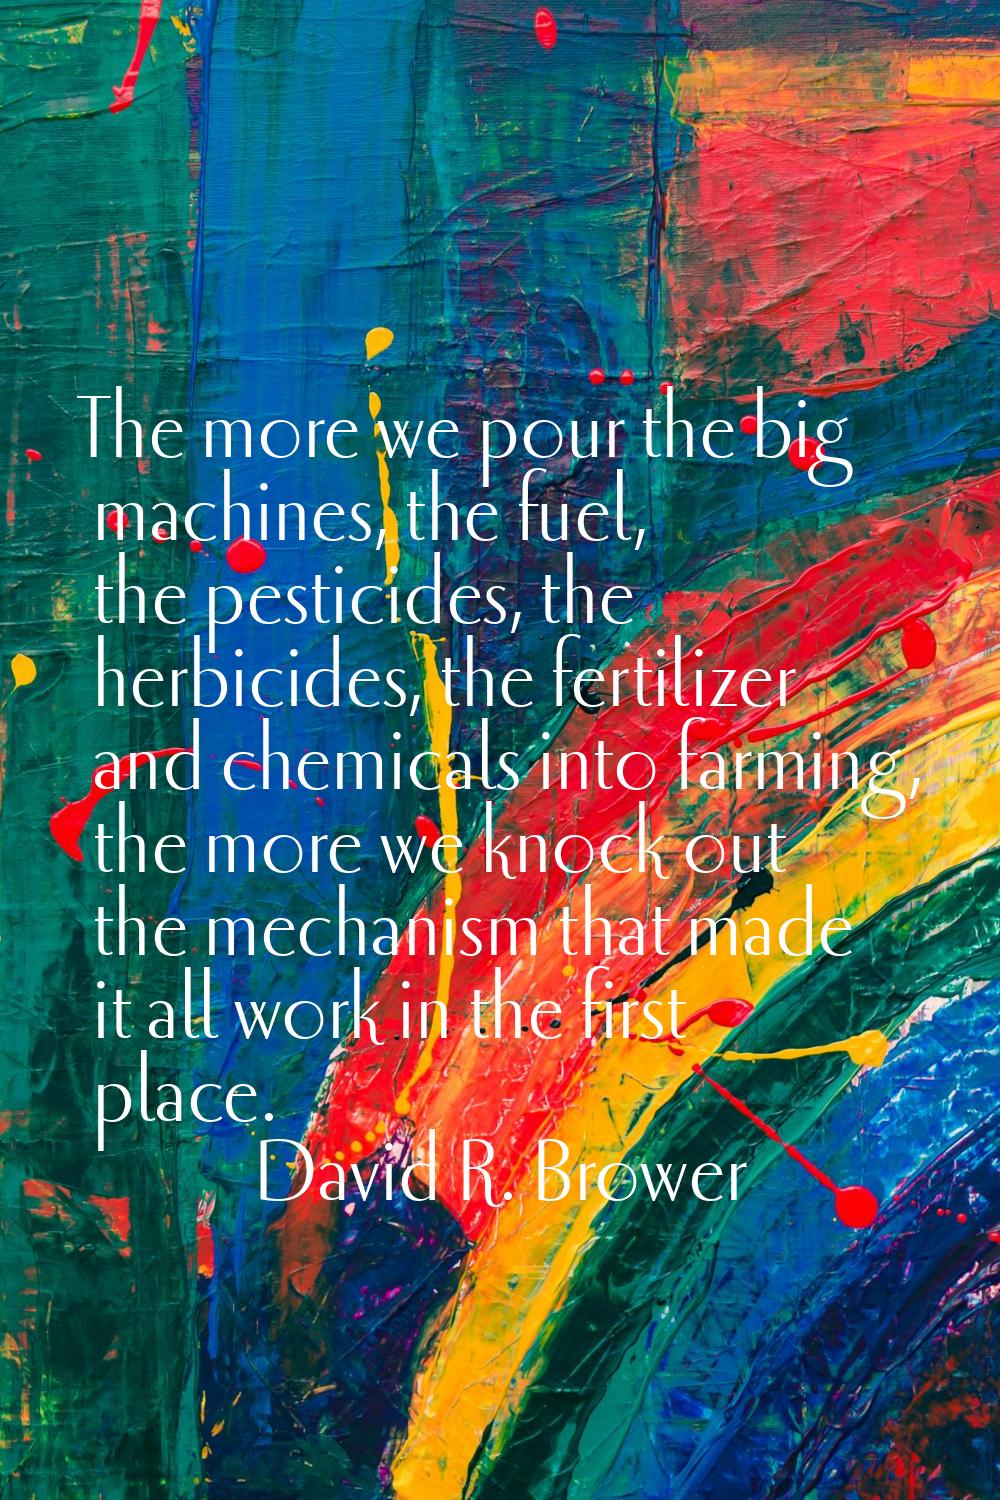 The more we pour the big machines, the fuel, the pesticides, the herbicides, the fertilizer and che